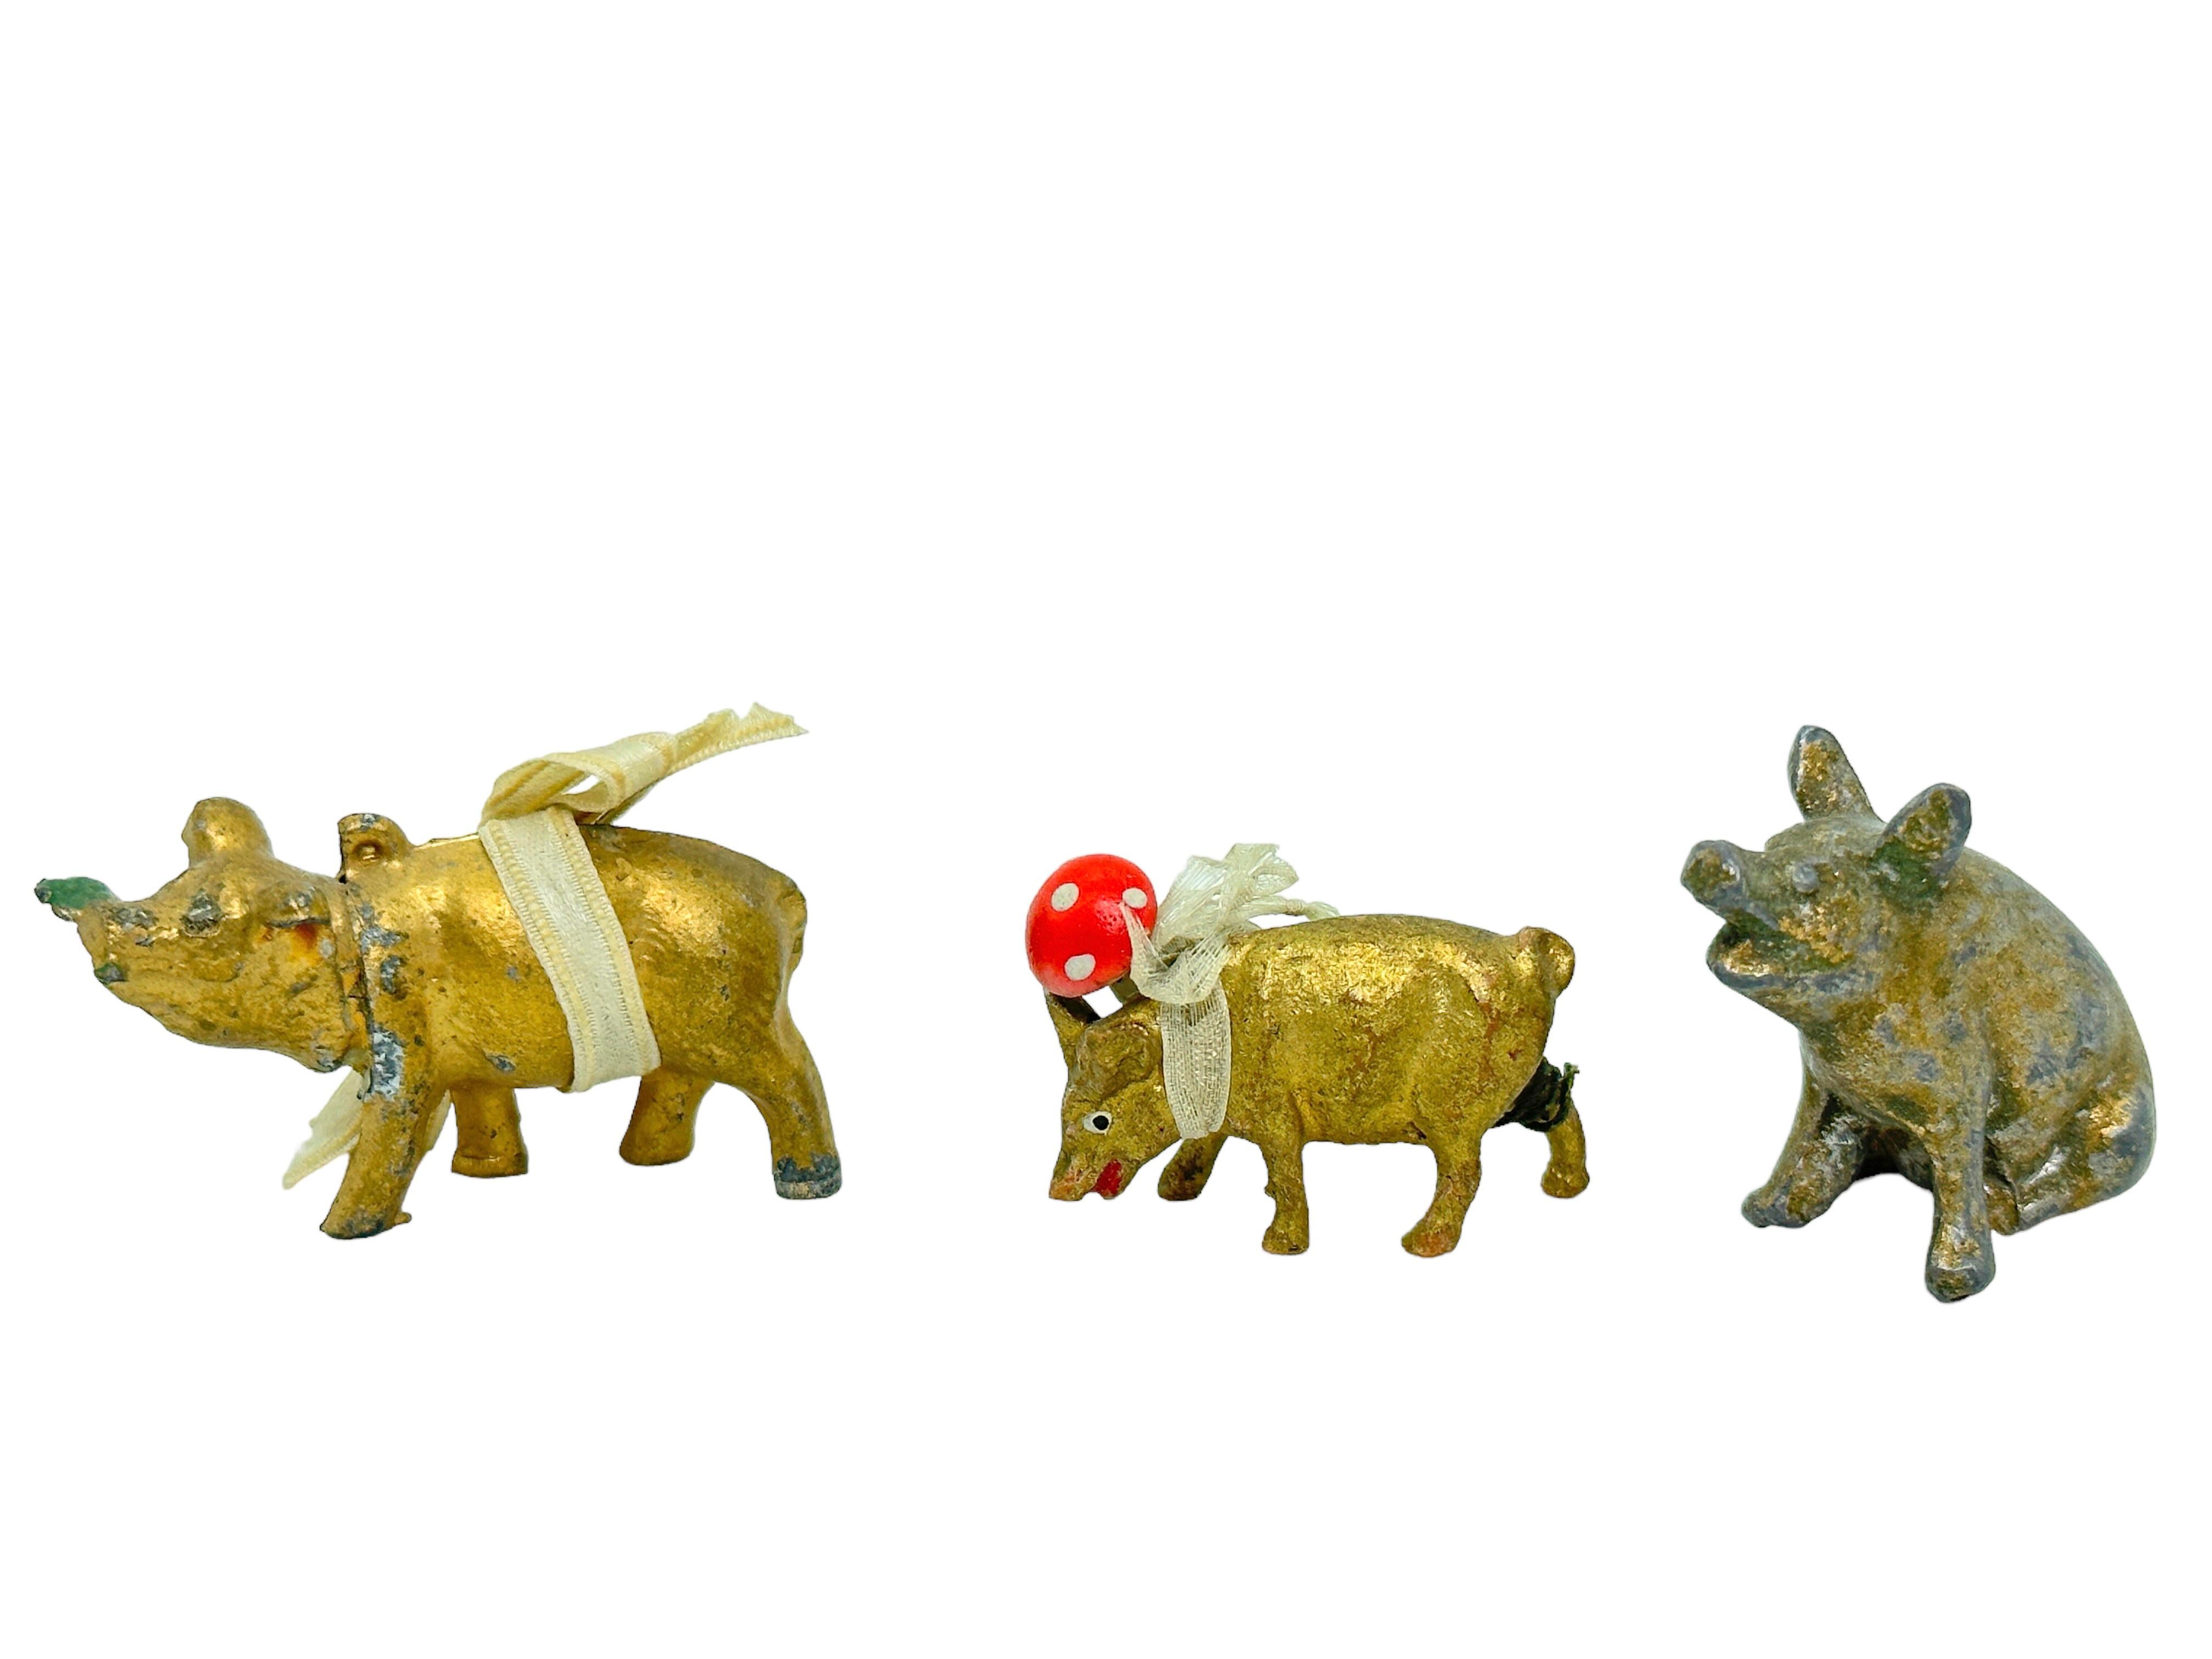 Hand-Painted Collection of Pig & Chimney Sweep Lucky Charm Figurines, Antique Austria, 1900s